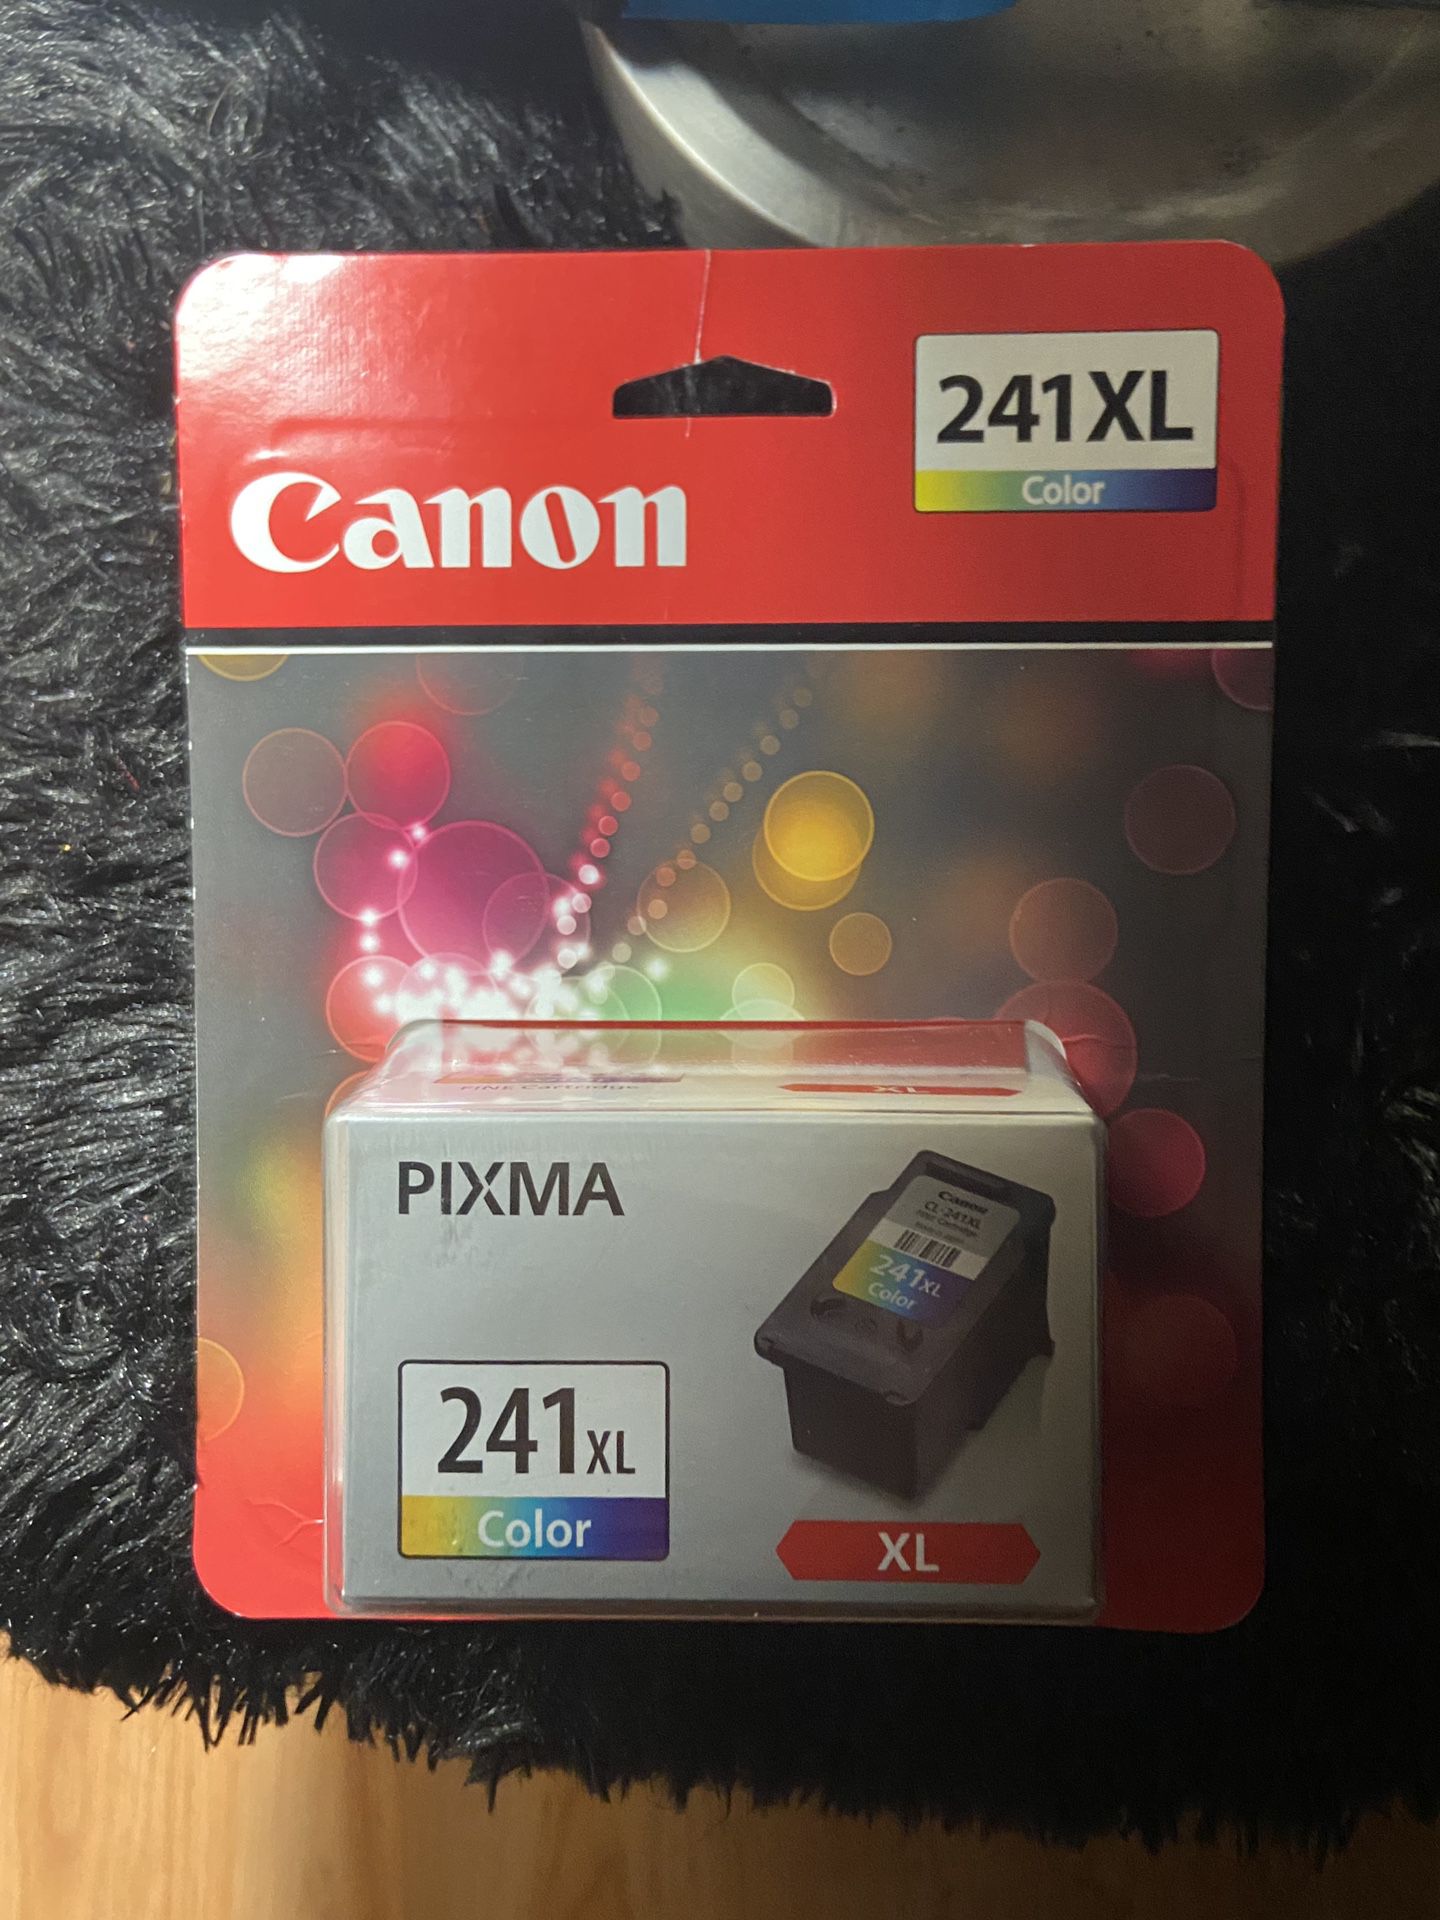 Cannon printer ink